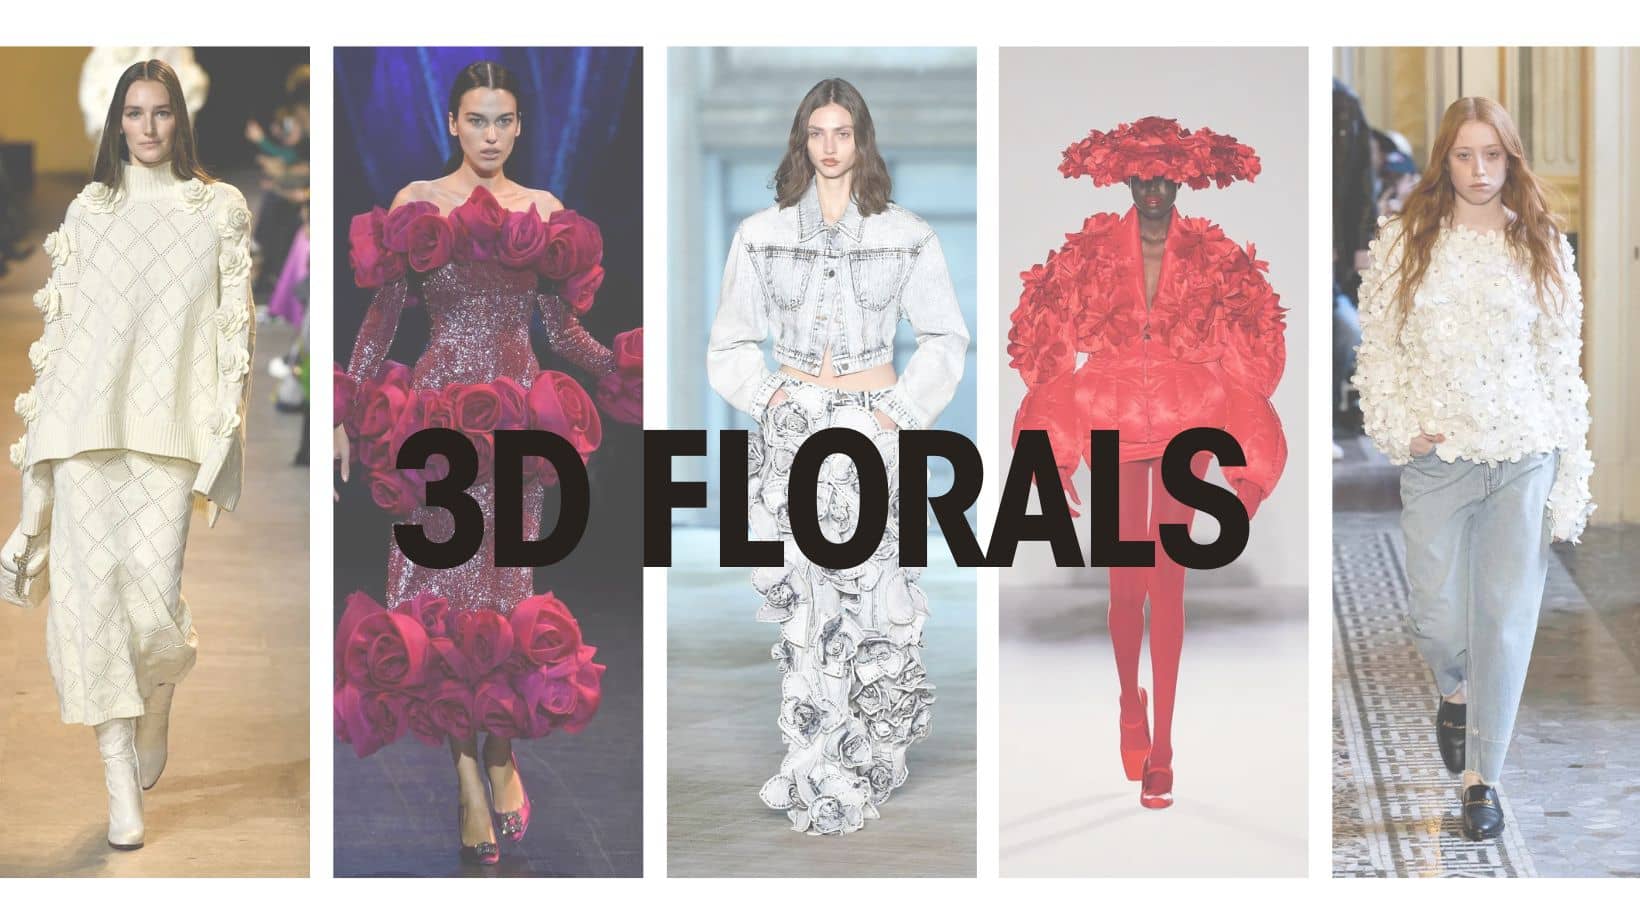 Florals are still in BUT now they are 3D Florals